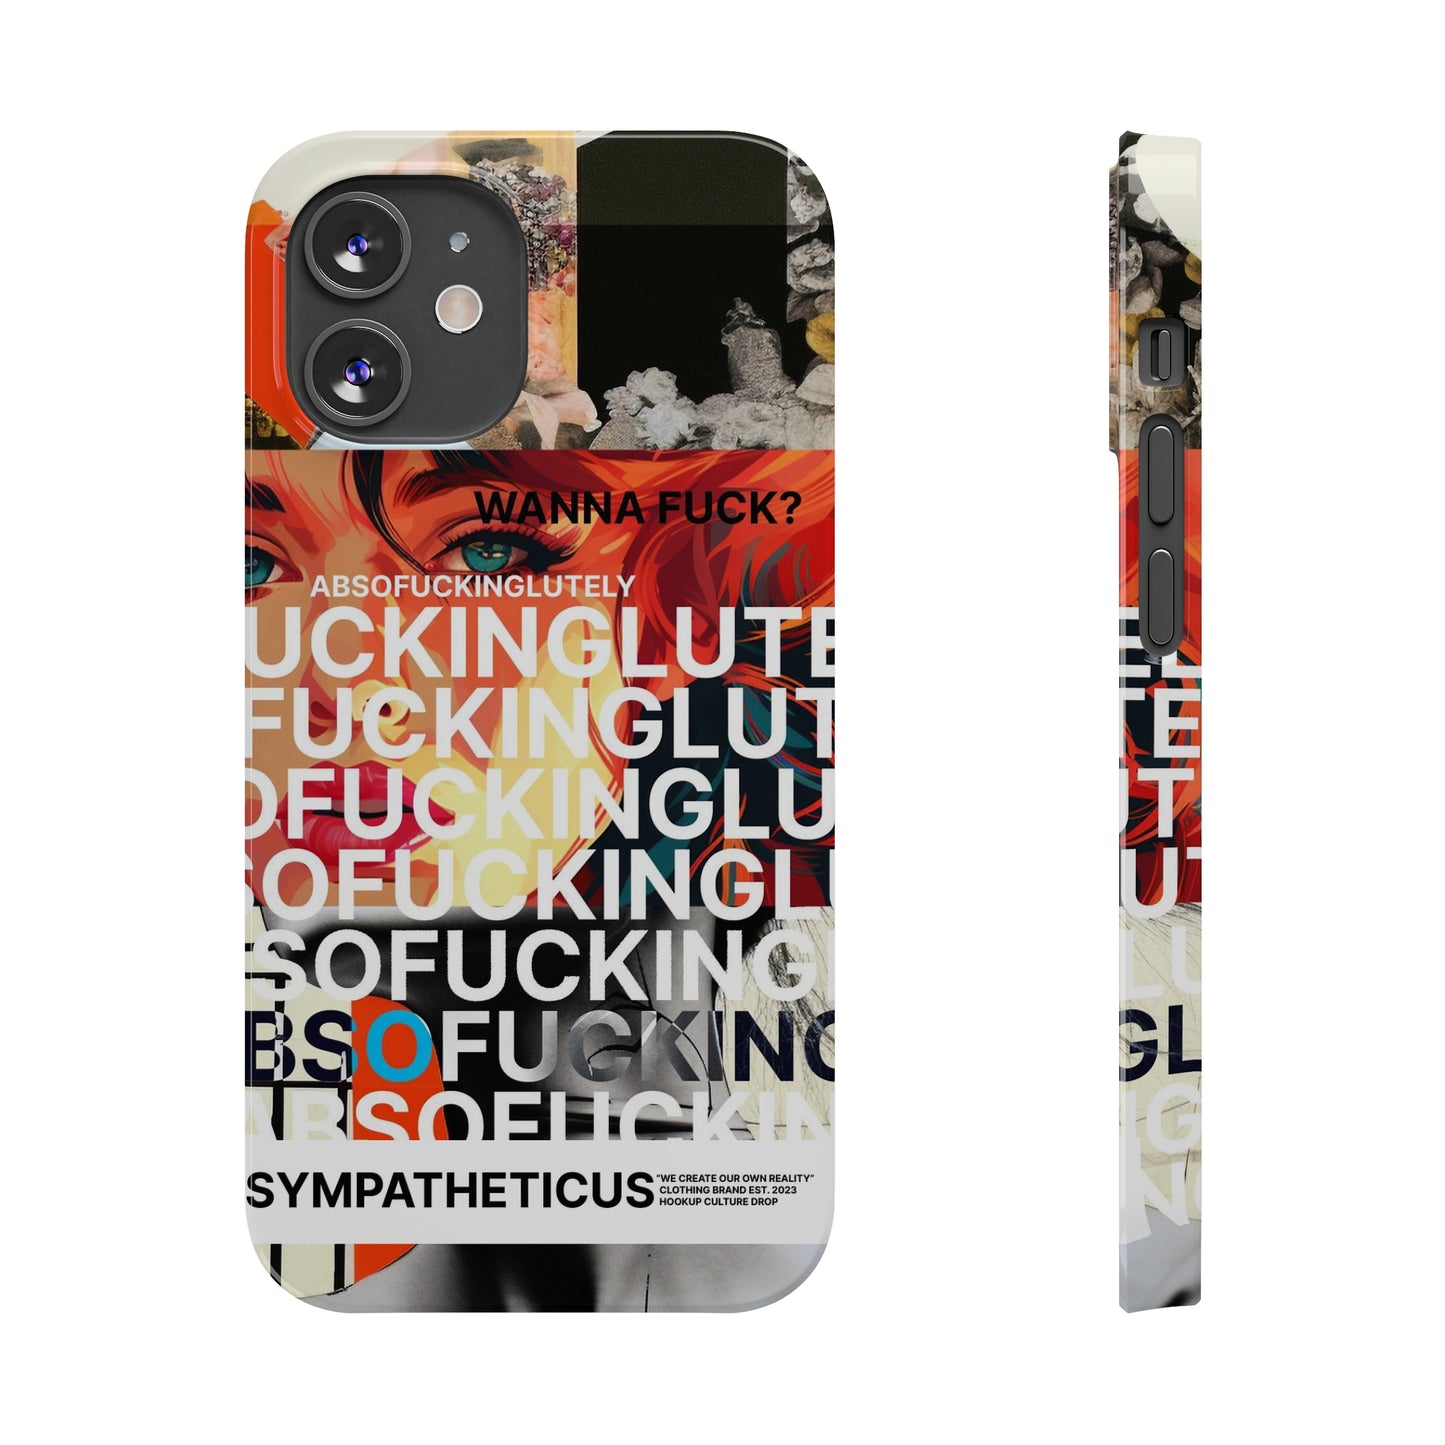 Hookup culture special iphone case-14